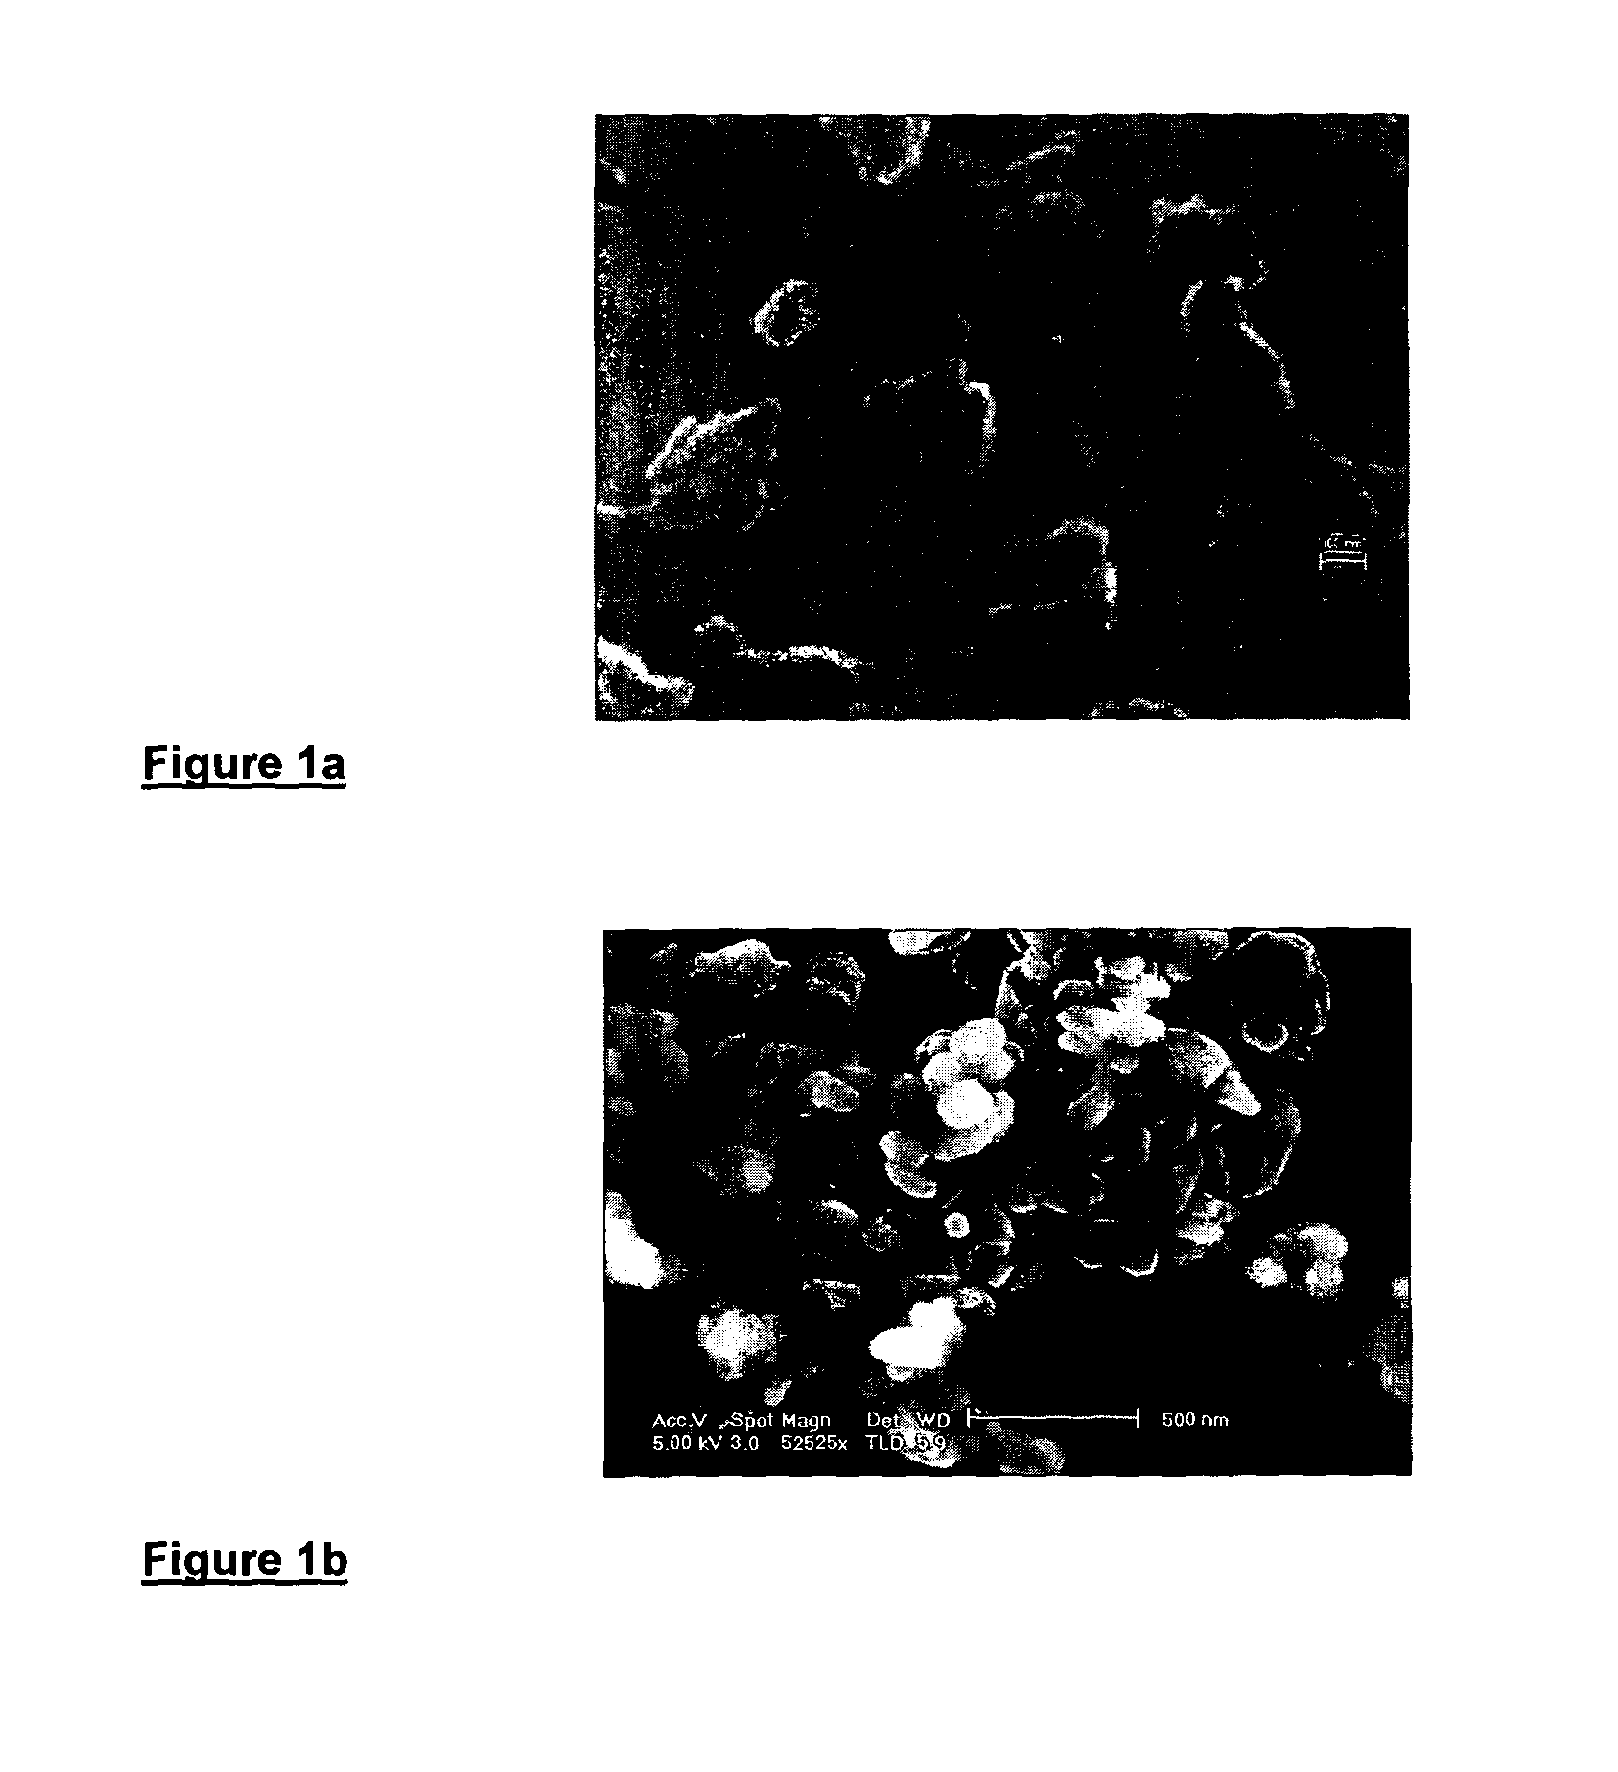 Smectic A compositions for use in optical devices